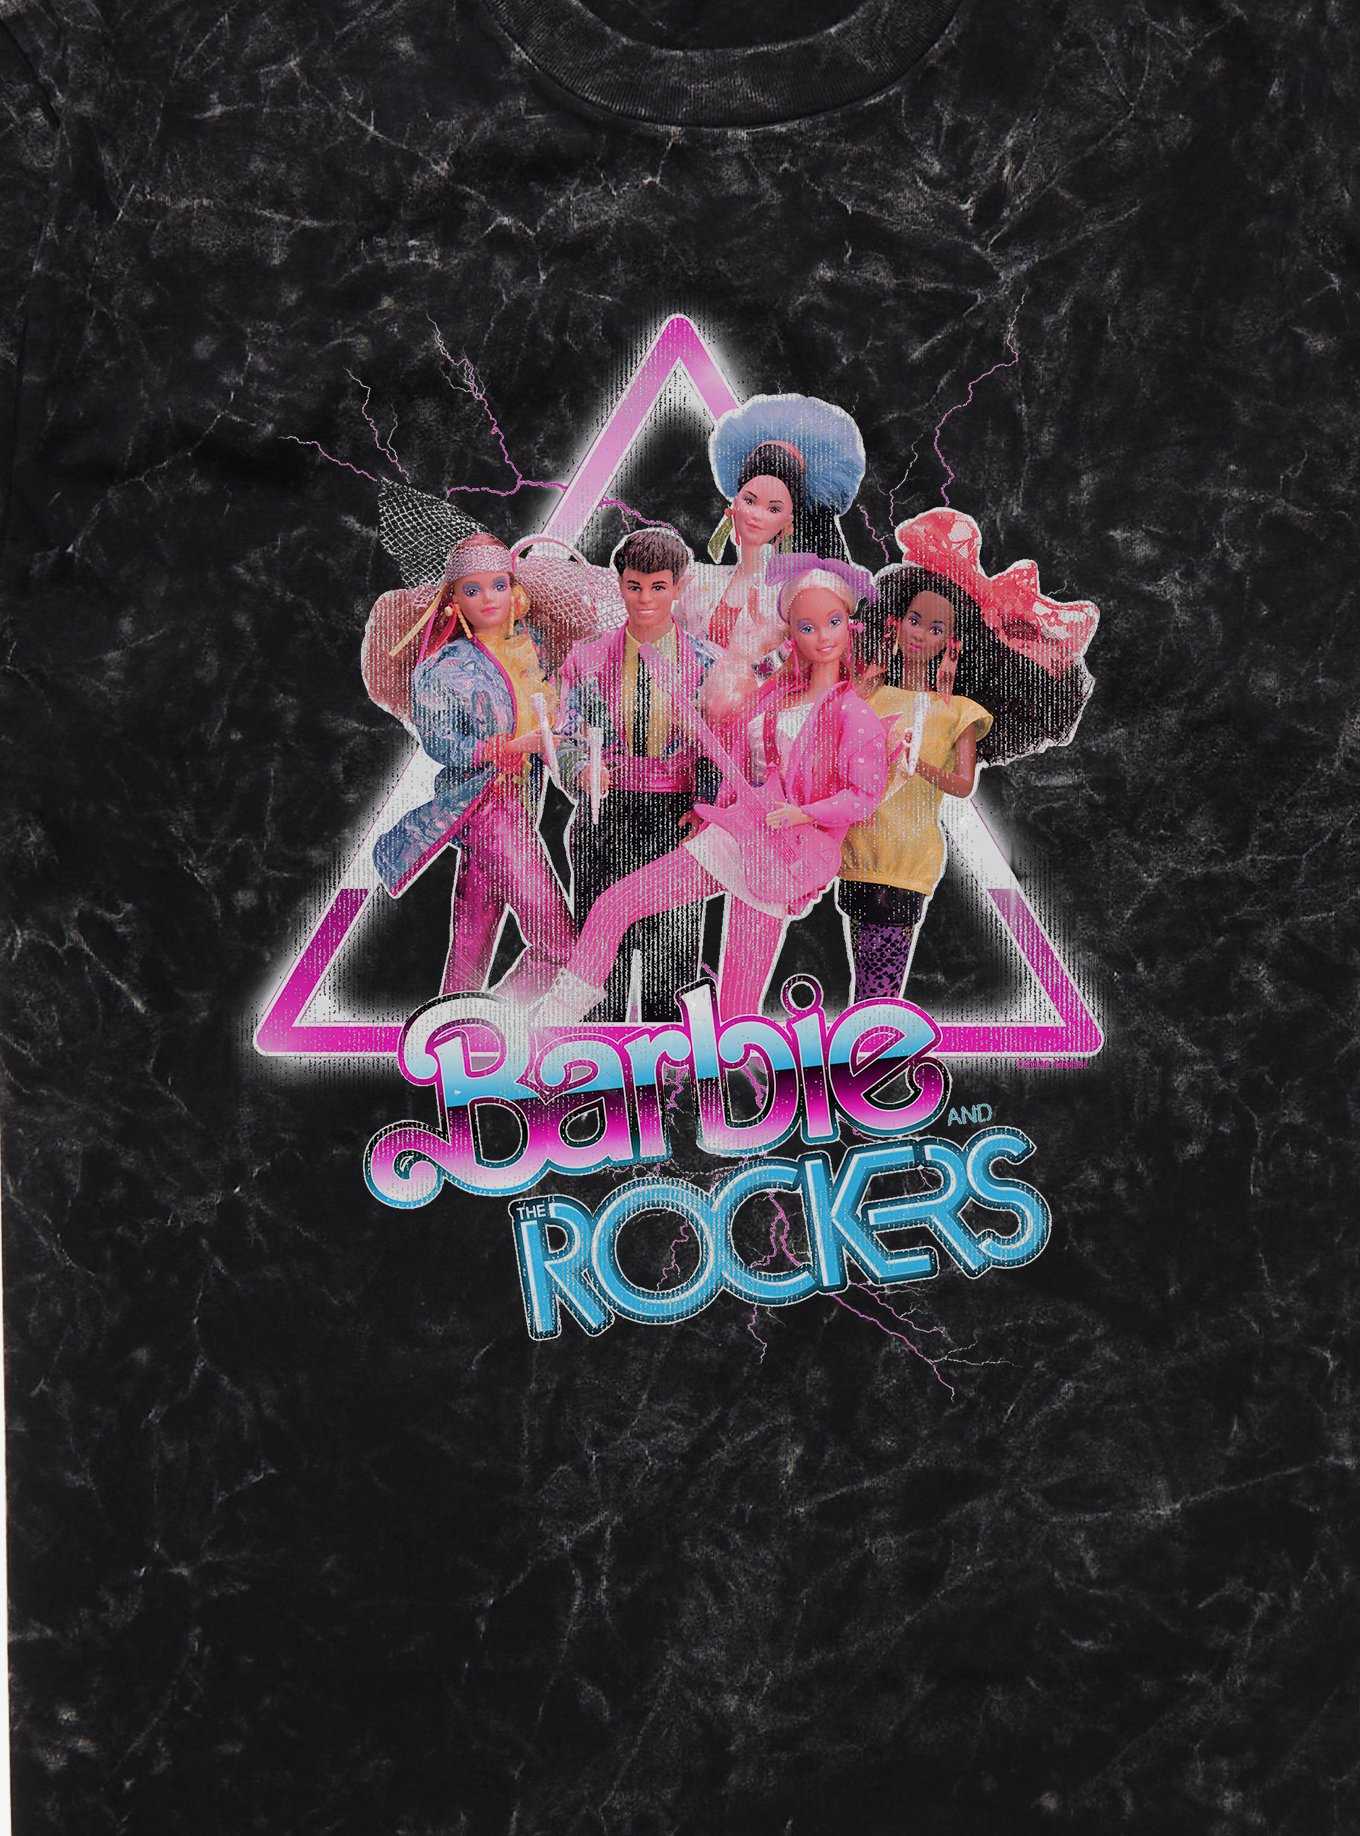 Barbie And The Rockers Eighties Glam Mineral Wash T-Shirt, , hi-res